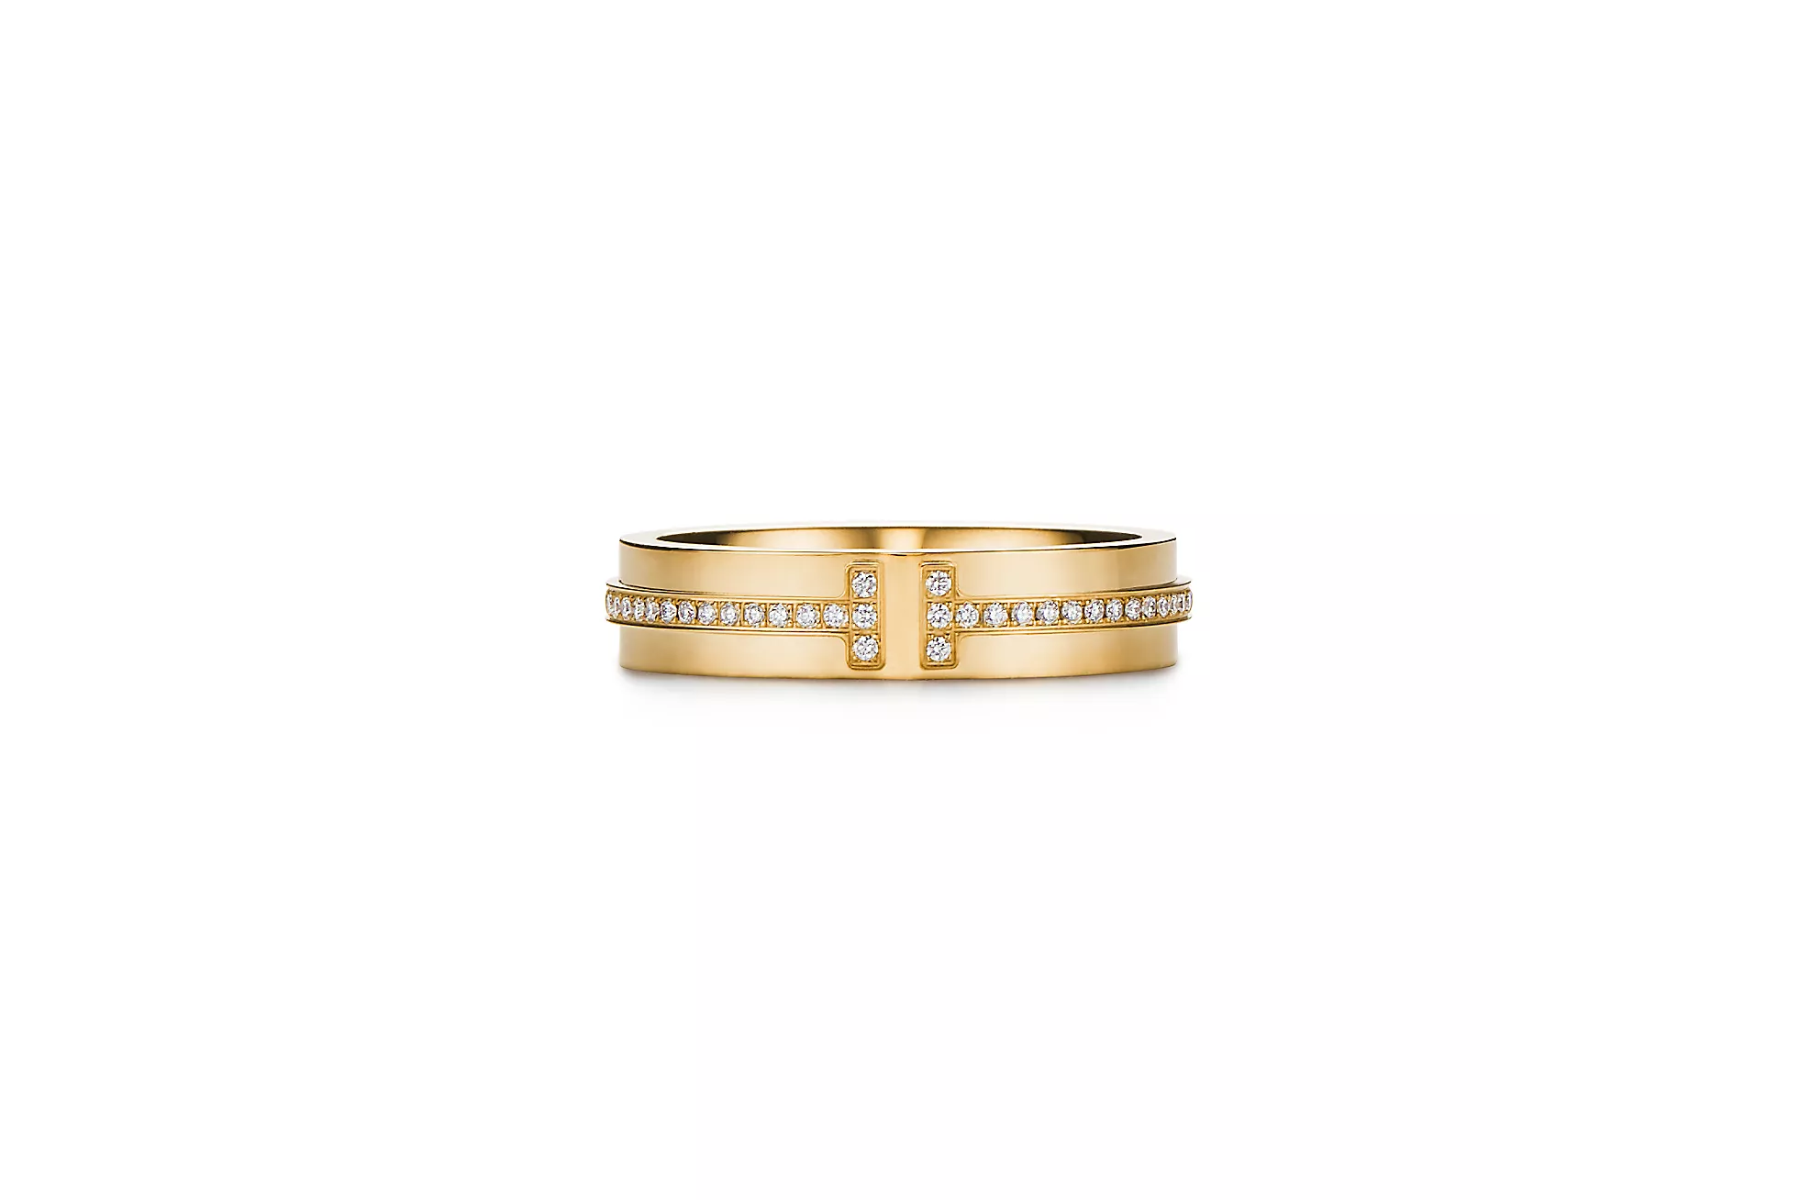 Slim ring design adorned with glittering round brilliant diamonds and a "T" motif